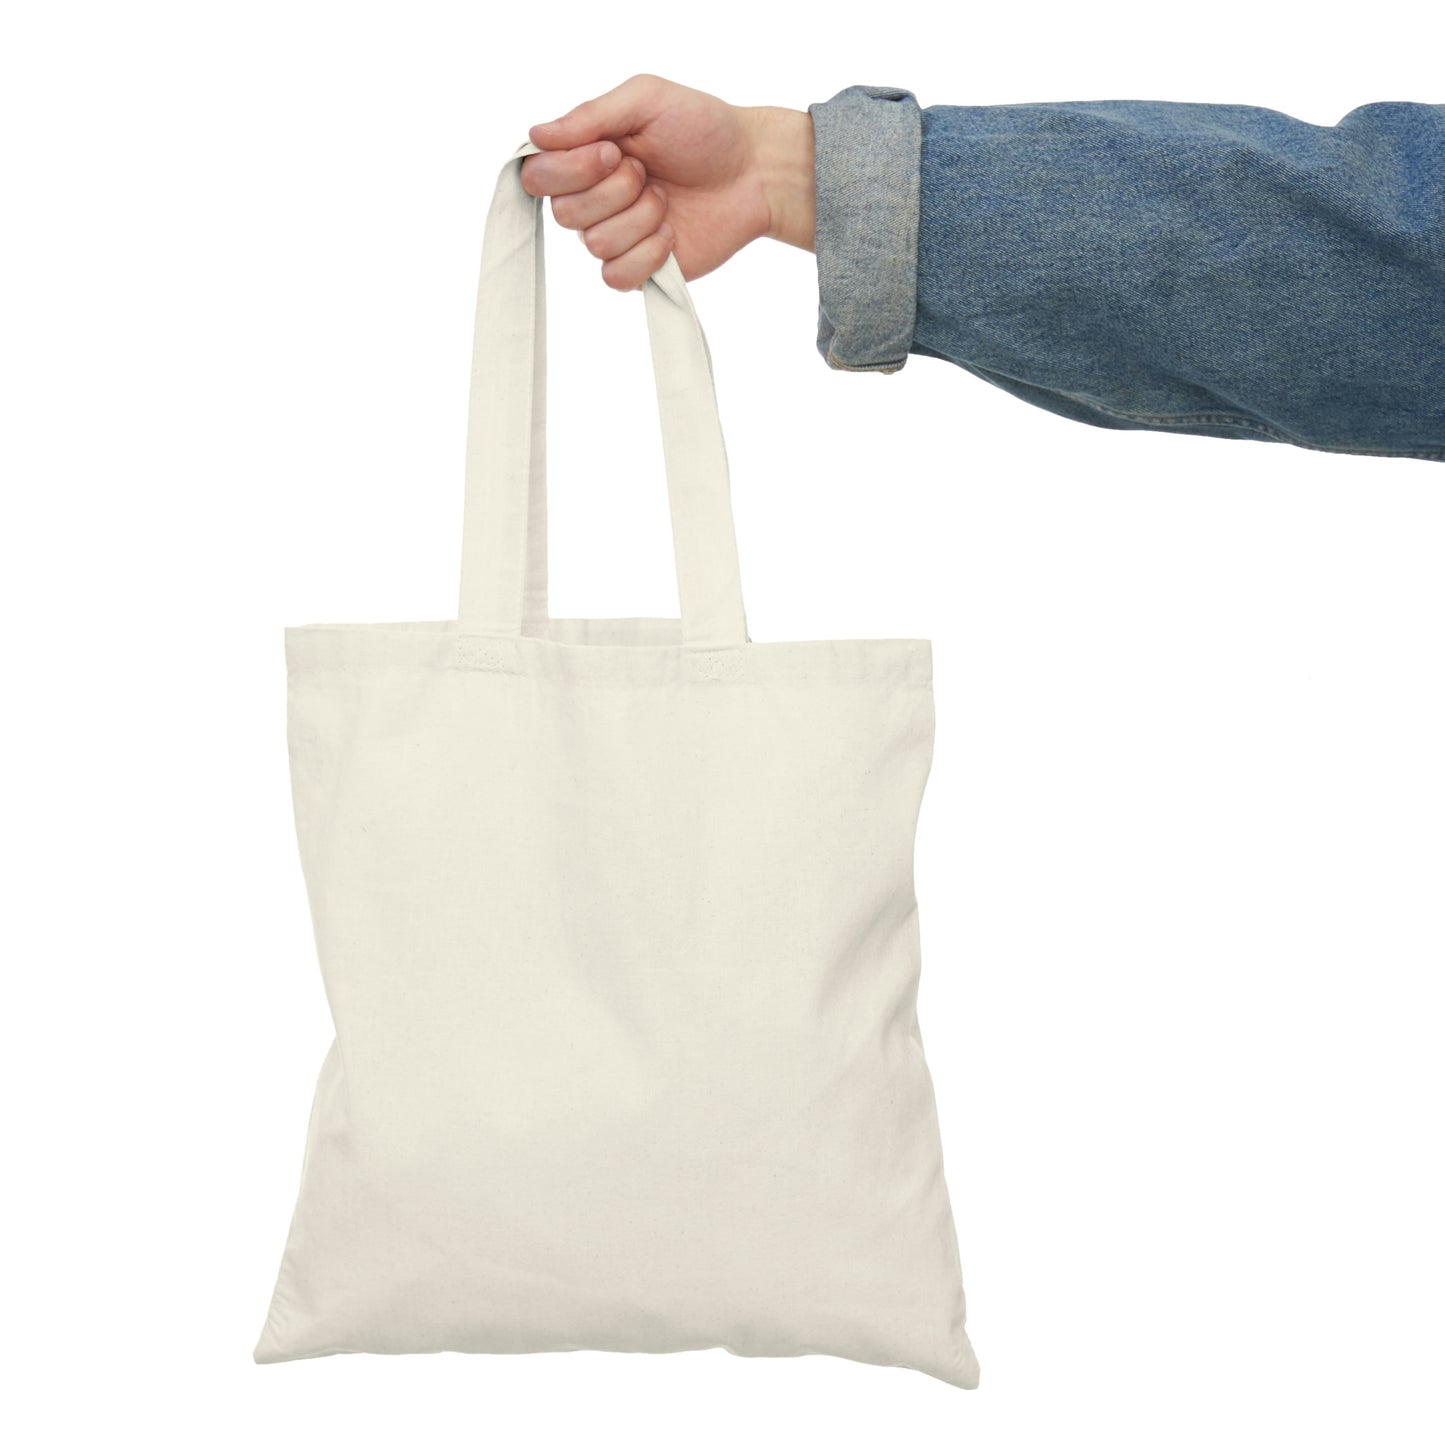 My Truth, Your Lies - Natural Tote Bag